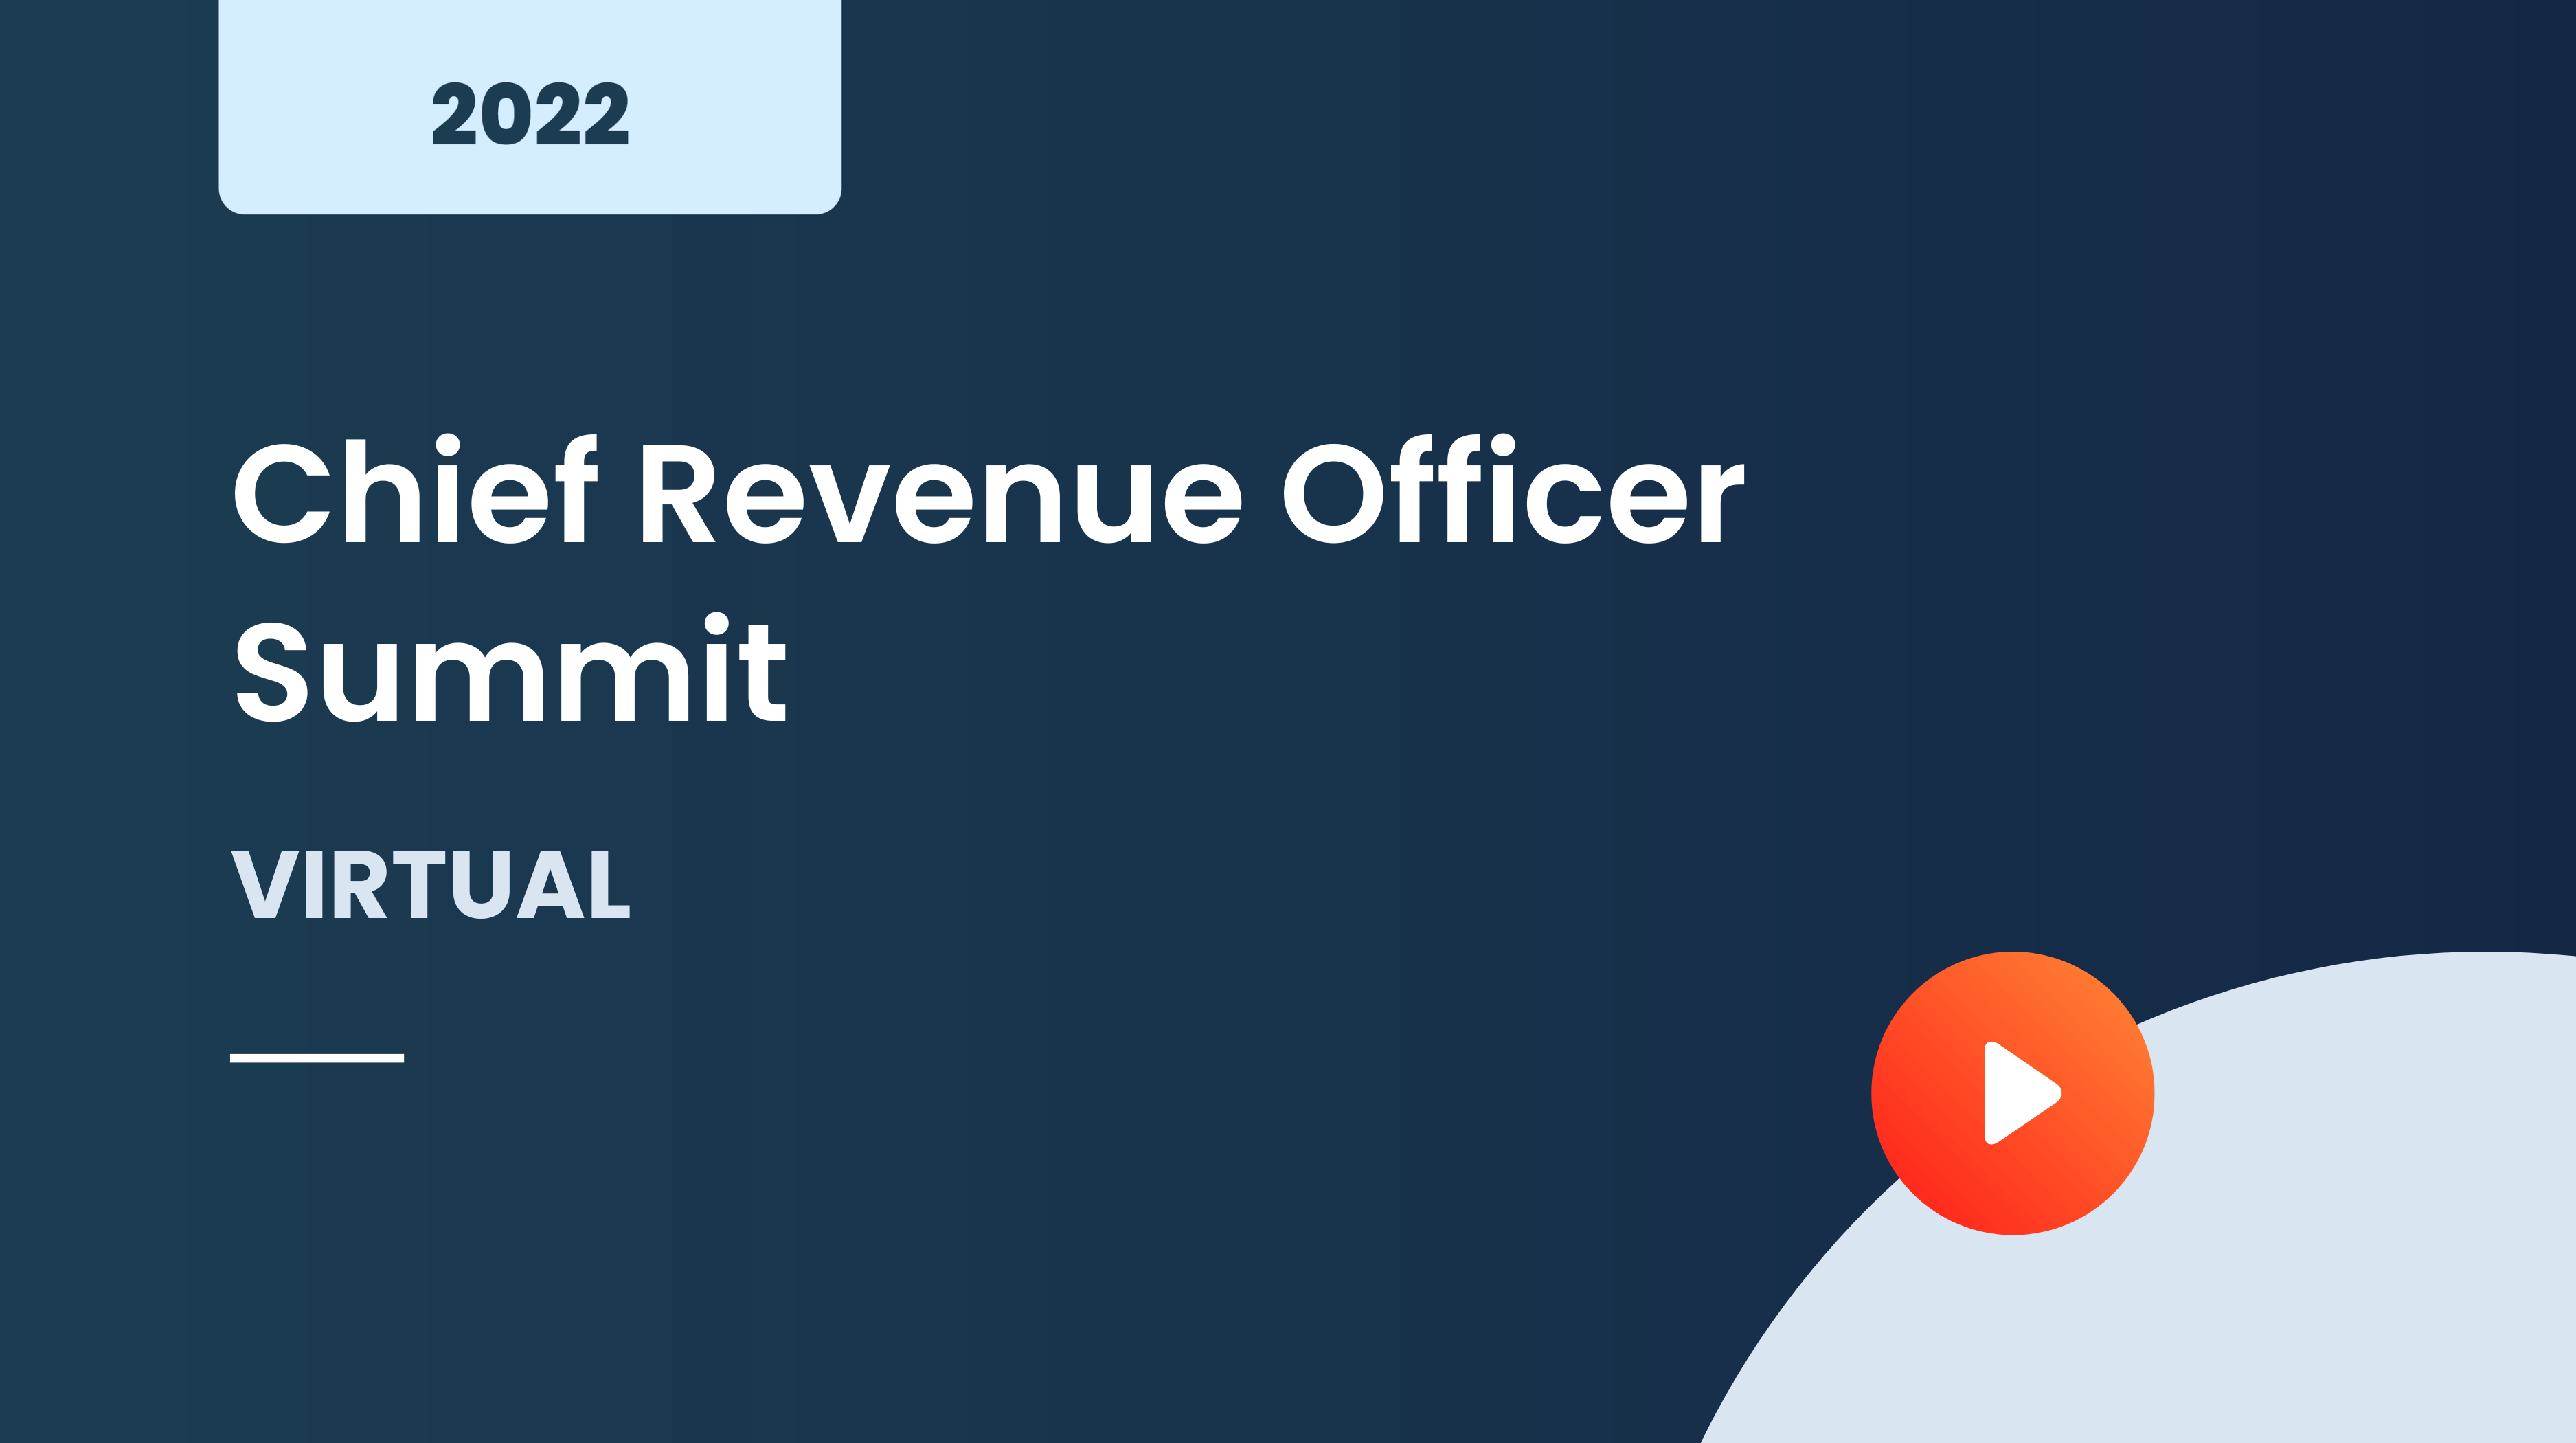 Chief Revenue Officer Summit February 2022